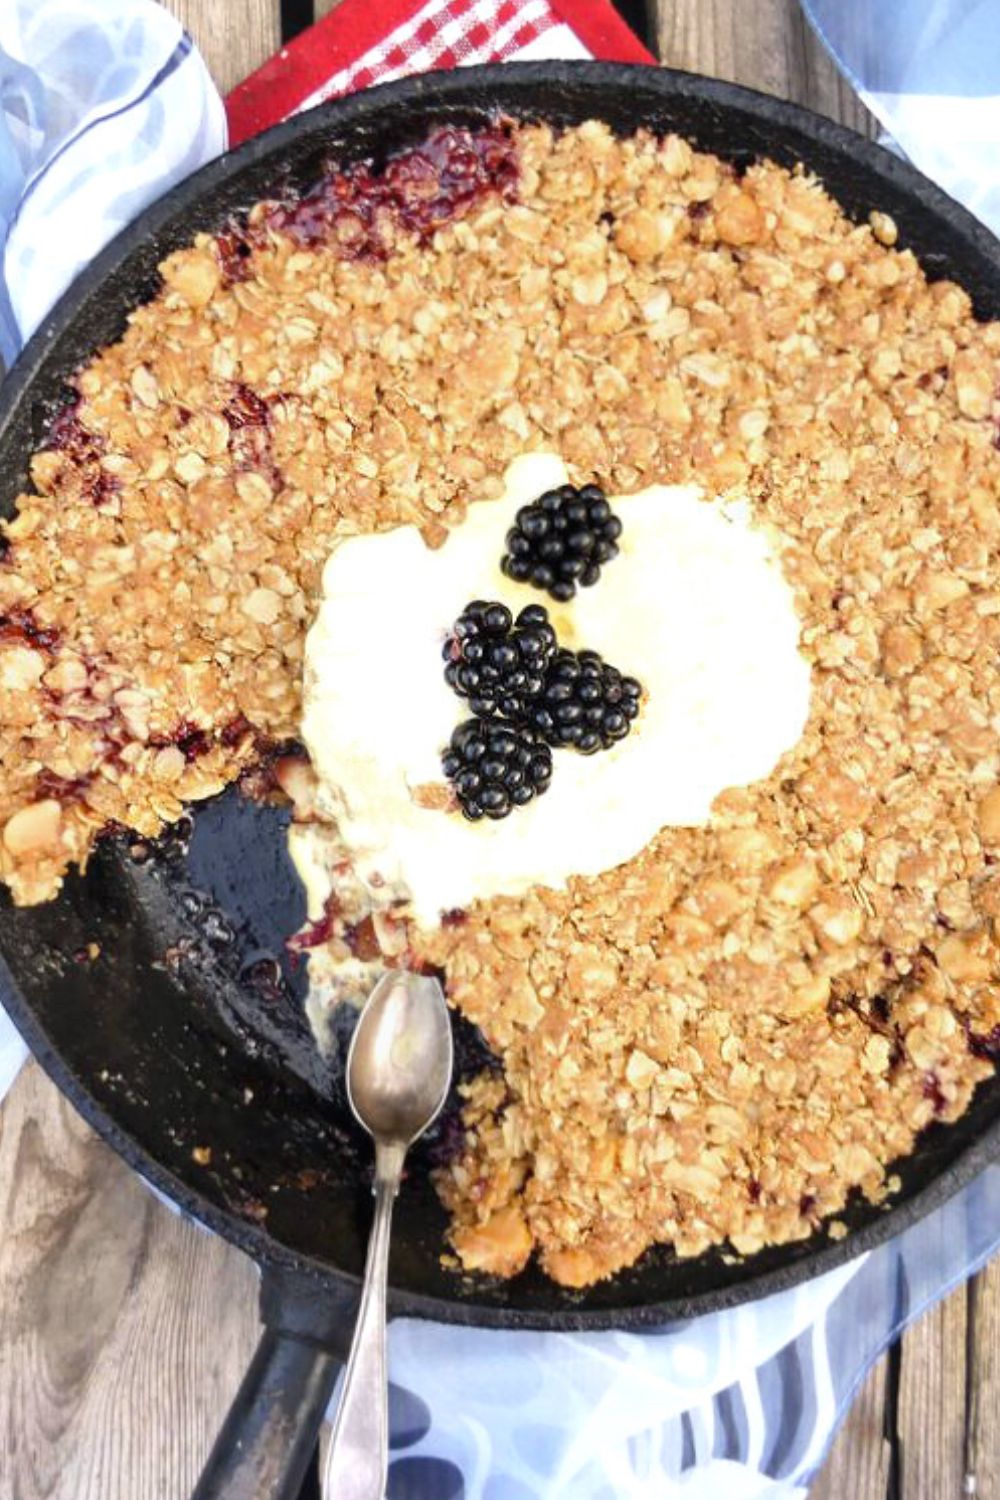 Skillet Blackberry Apple Oat Crunch with Salted Macadamia